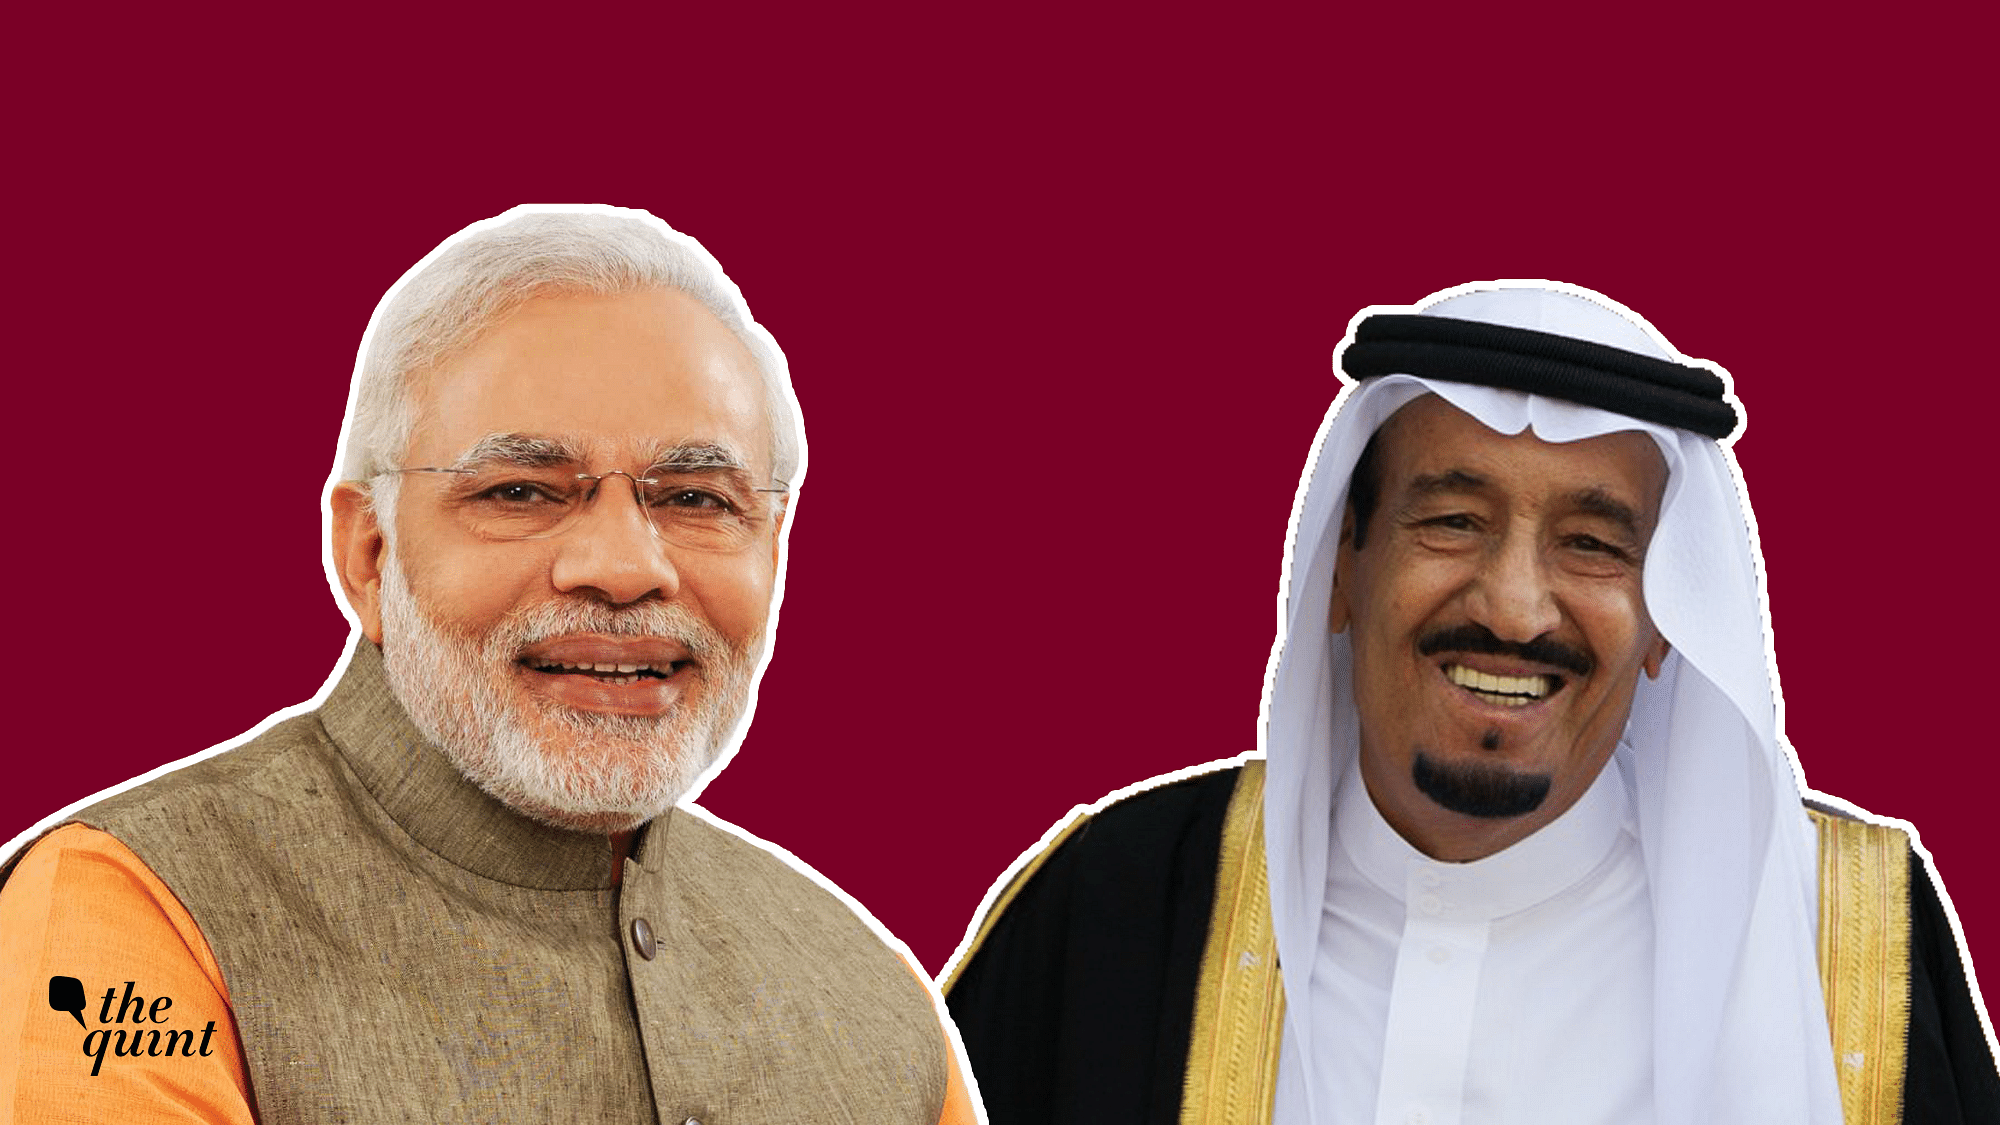 Indian Prime Minister Narendra Modi (L) and King Salman (R) who is likely to visit India later this year